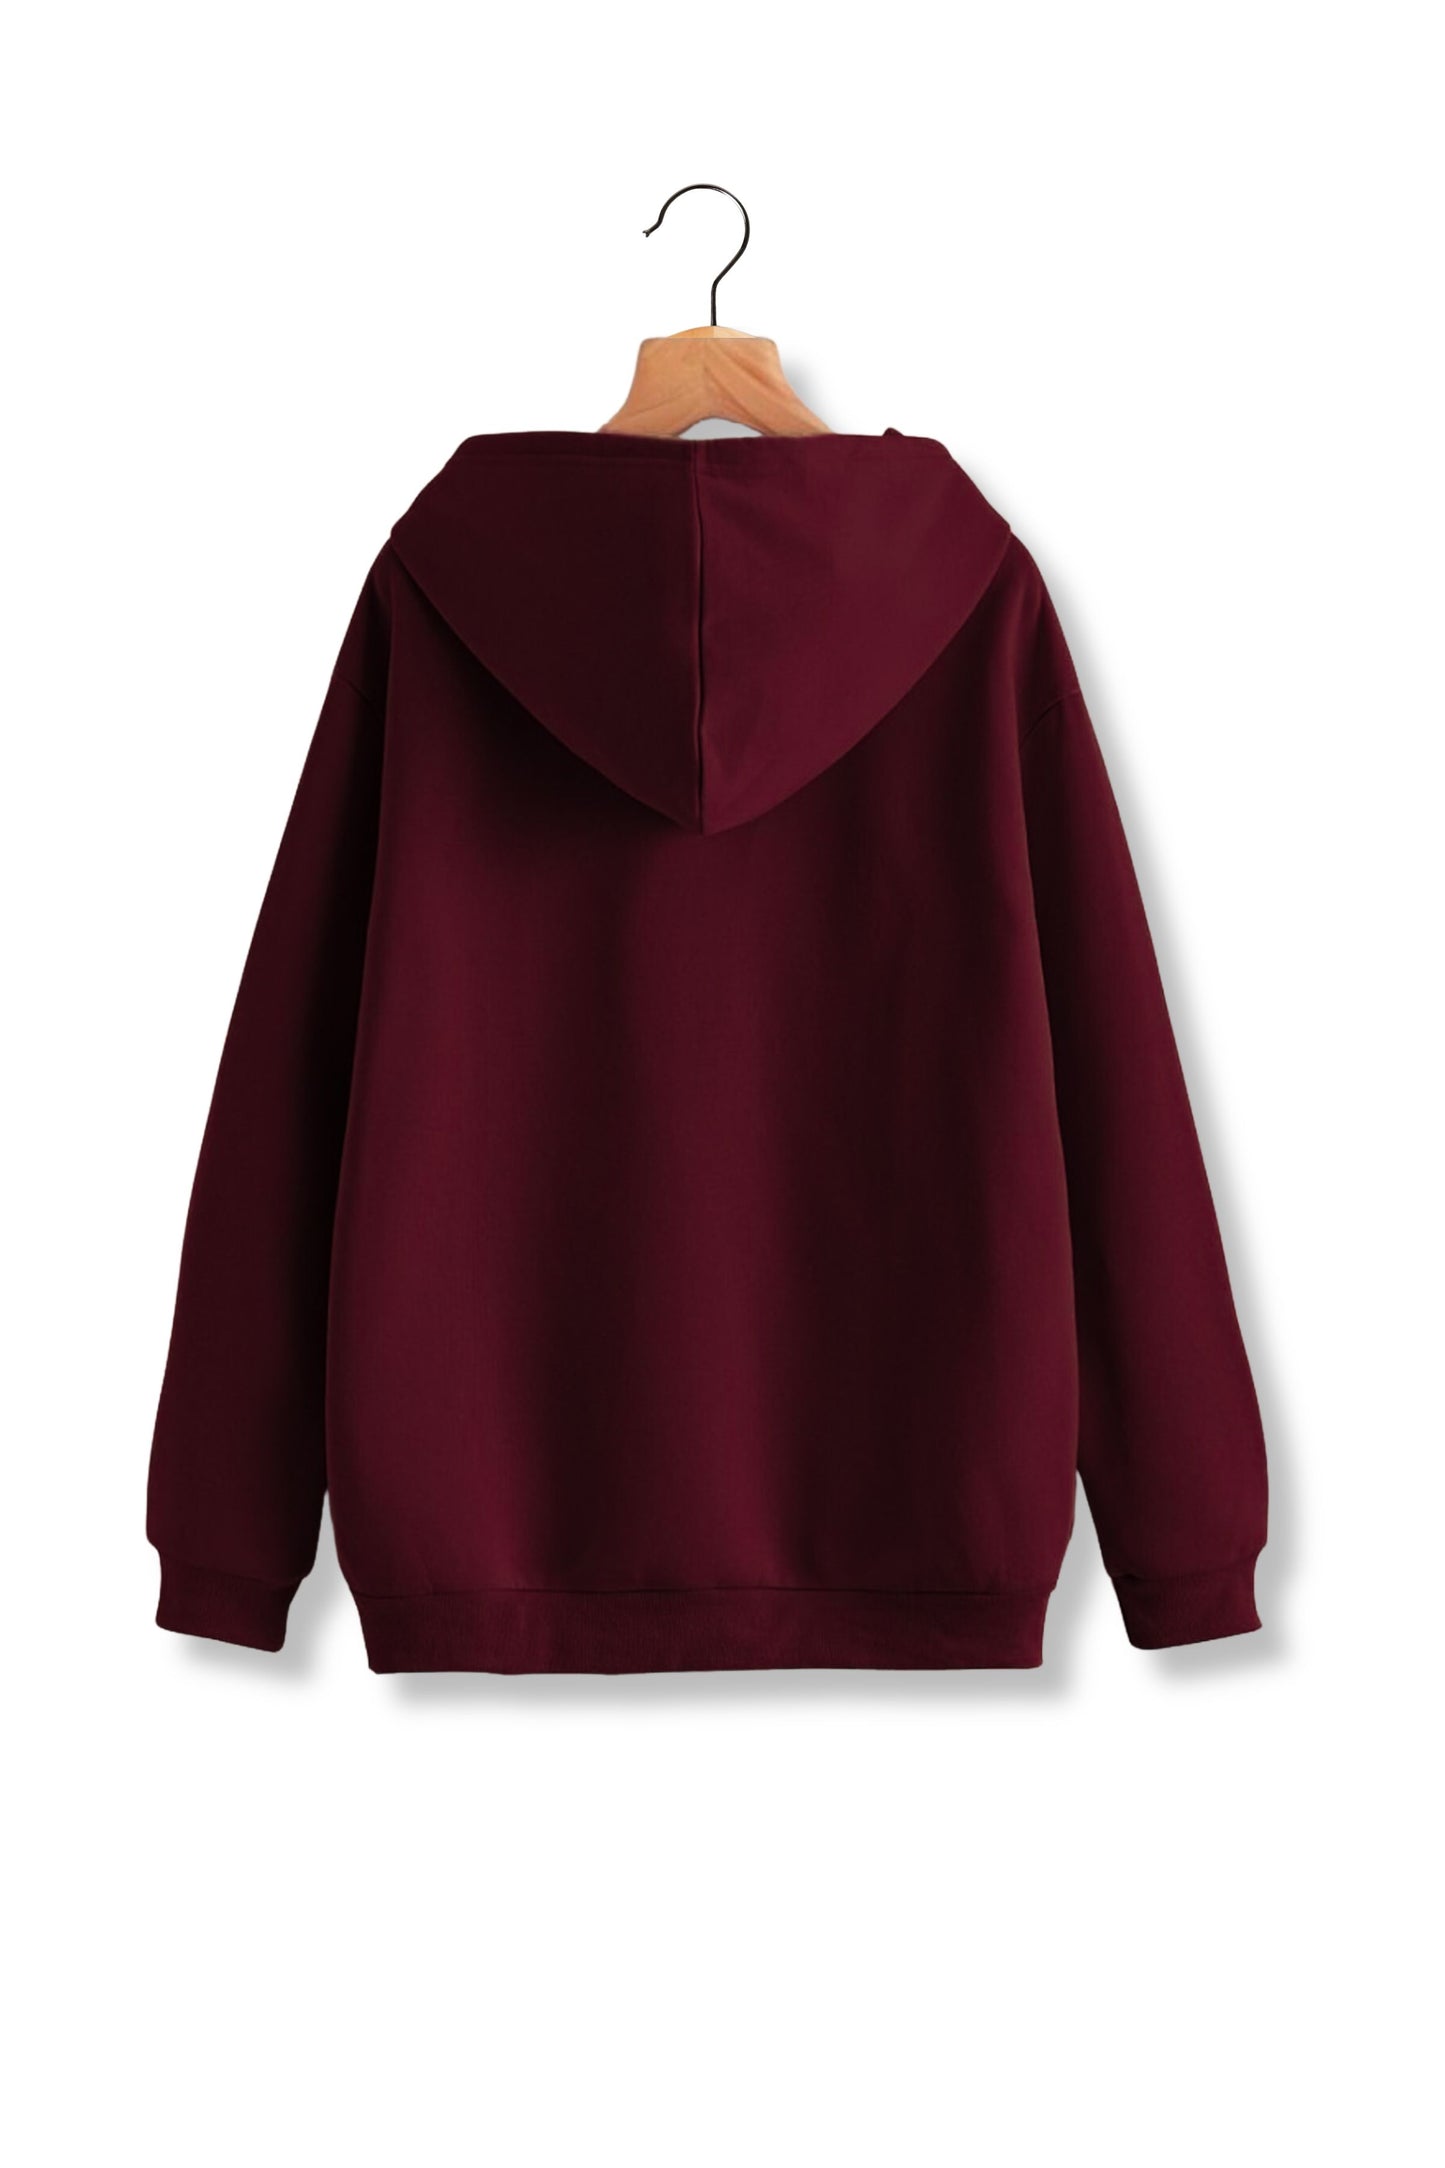 Unisex French Terry Hoodies - Maroon